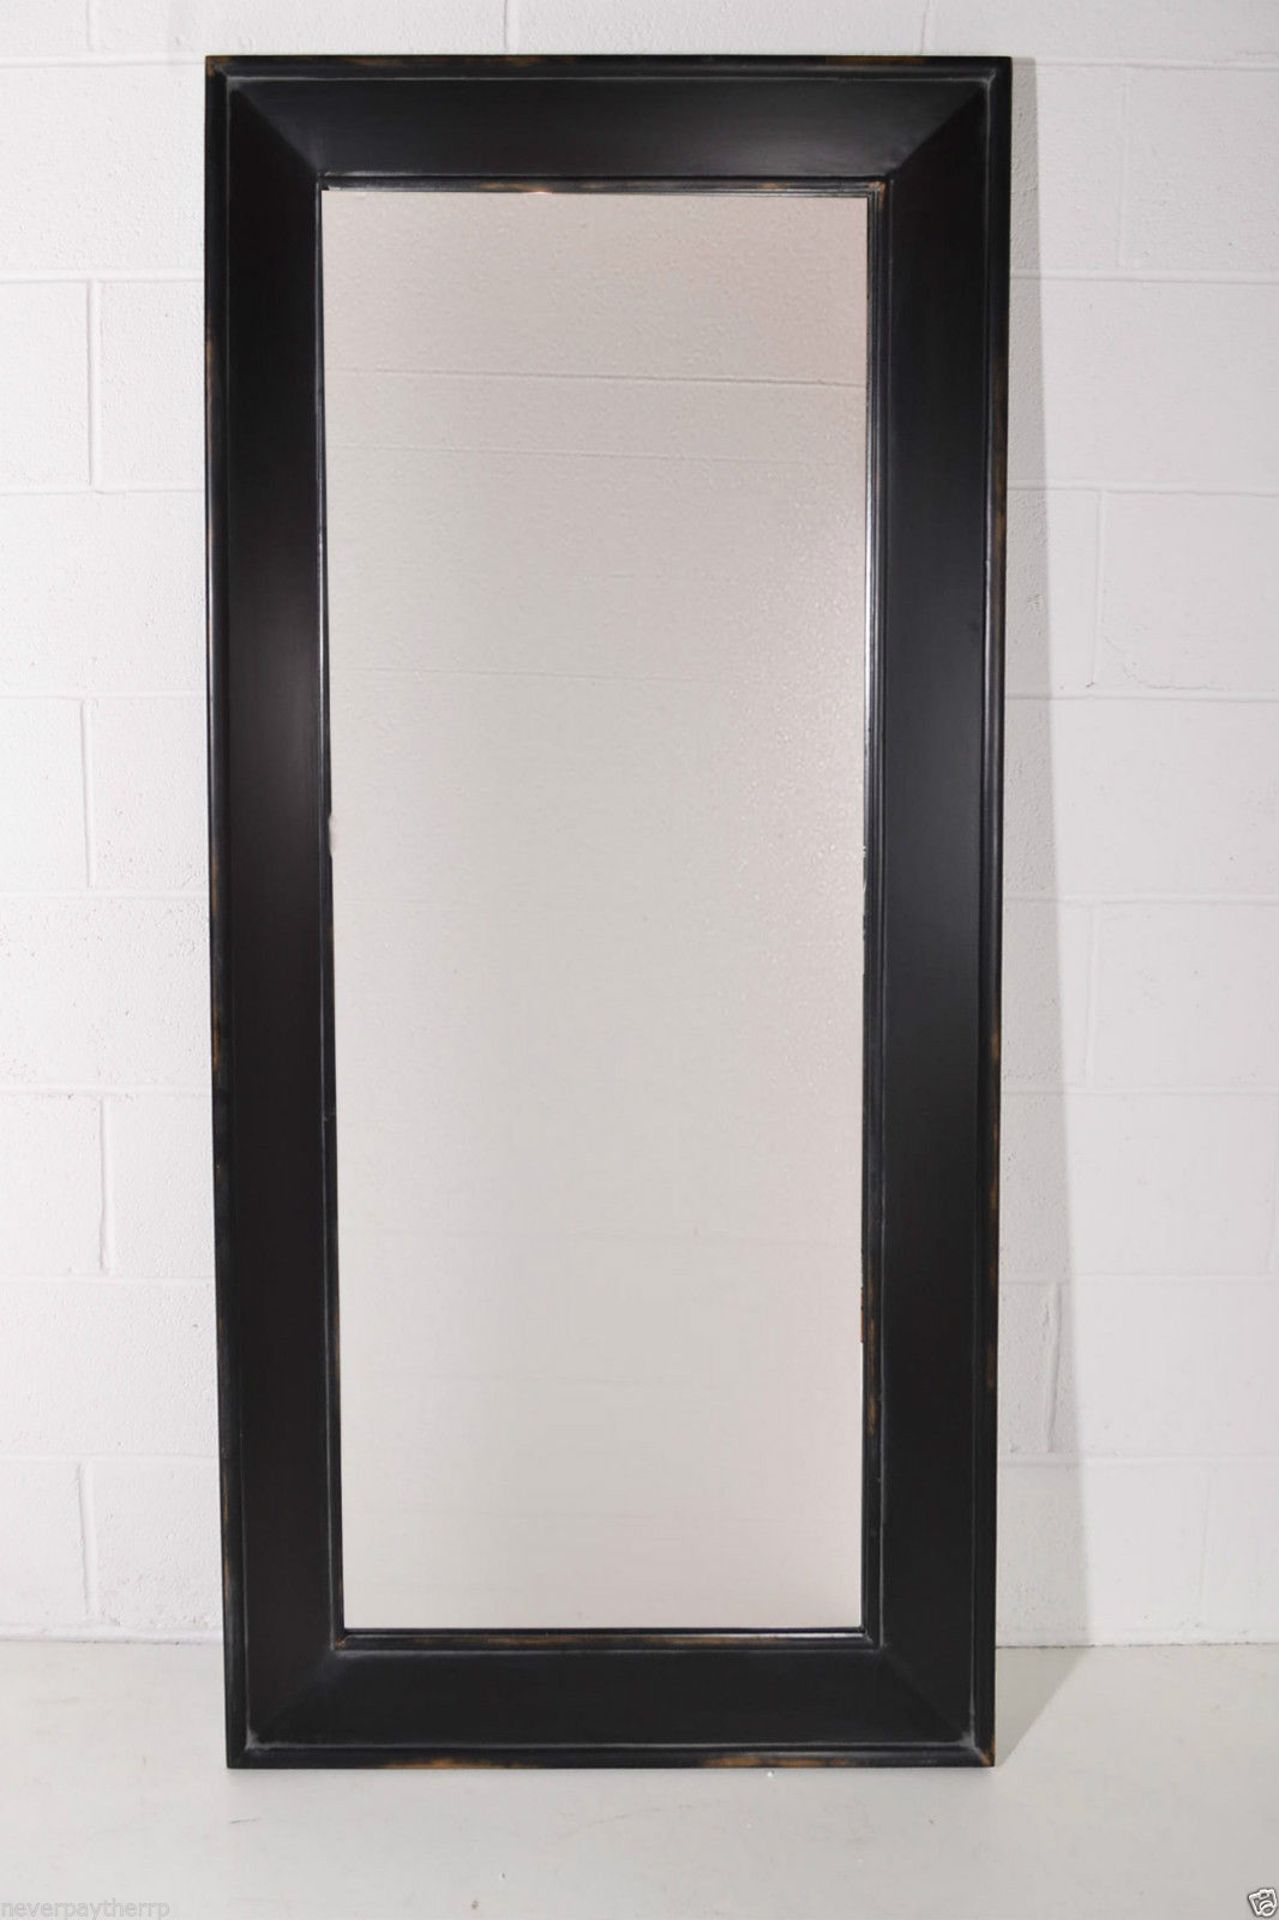 NEW Huge Noir Black Rectangular Mirror, Shabby Chic MPN 13558 RRP £350 New & boxed perfect stock. - Image 3 of 4